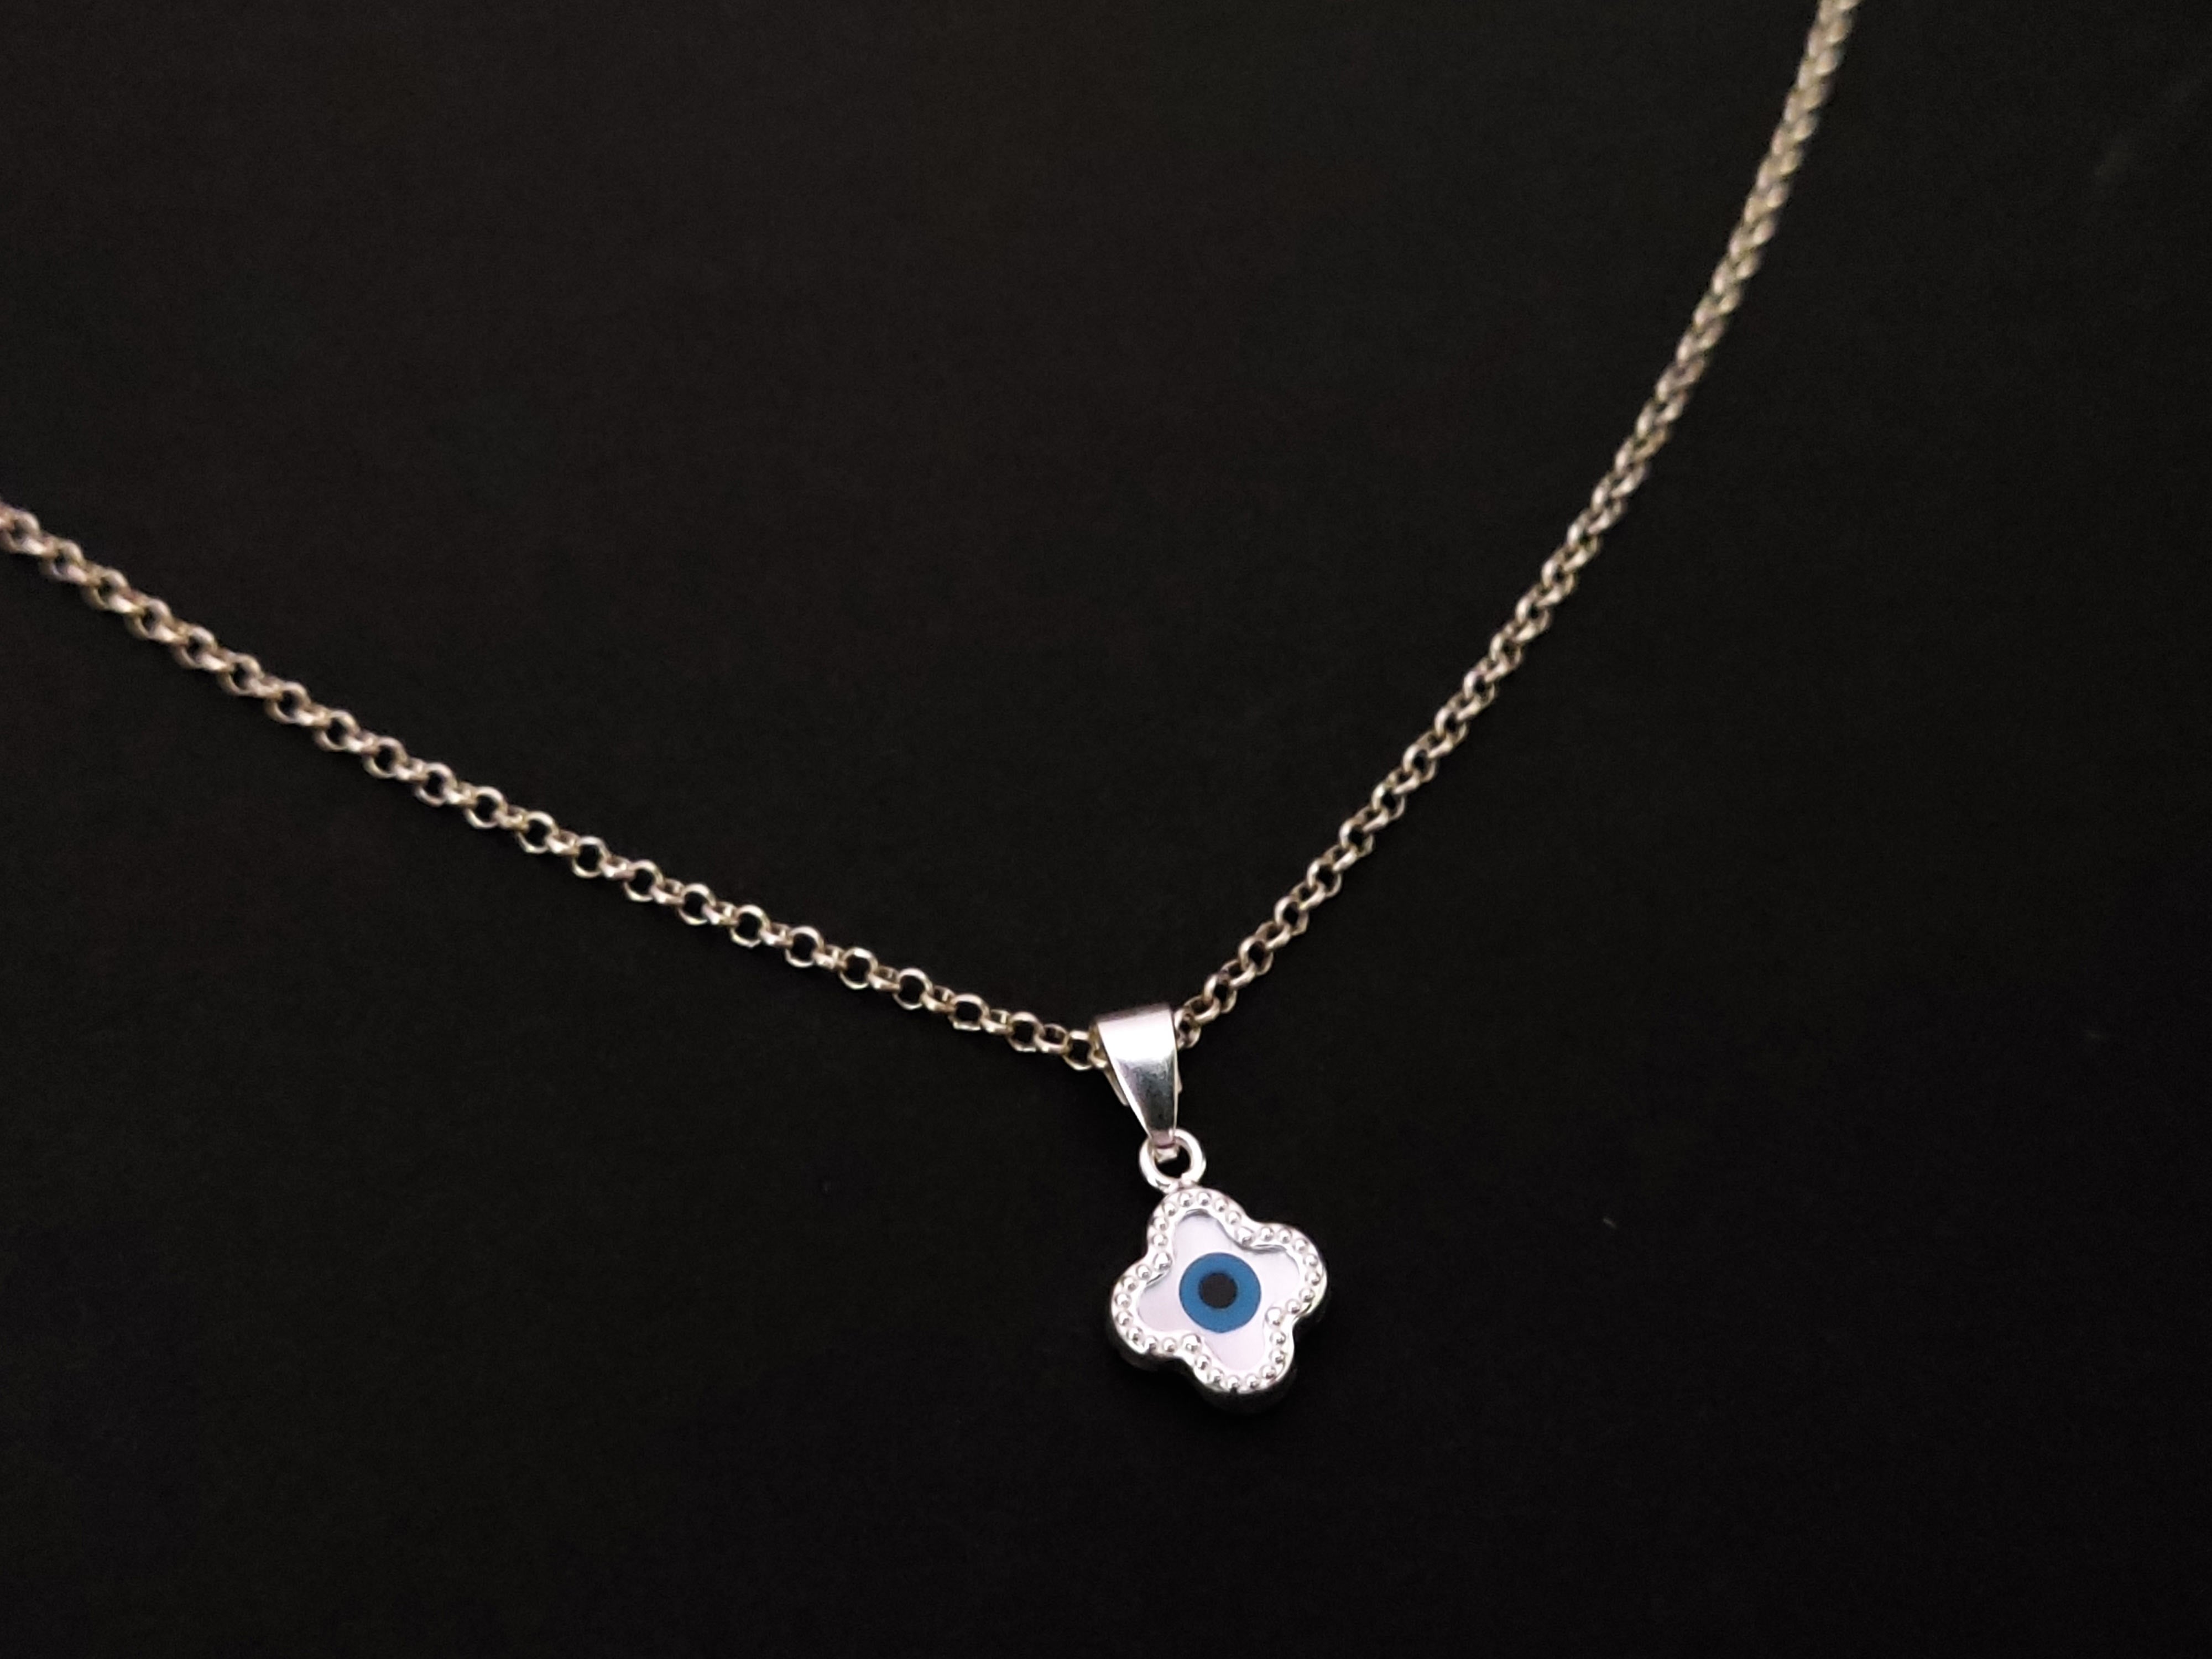 Eye necklace with a cross: A special gift for every woman